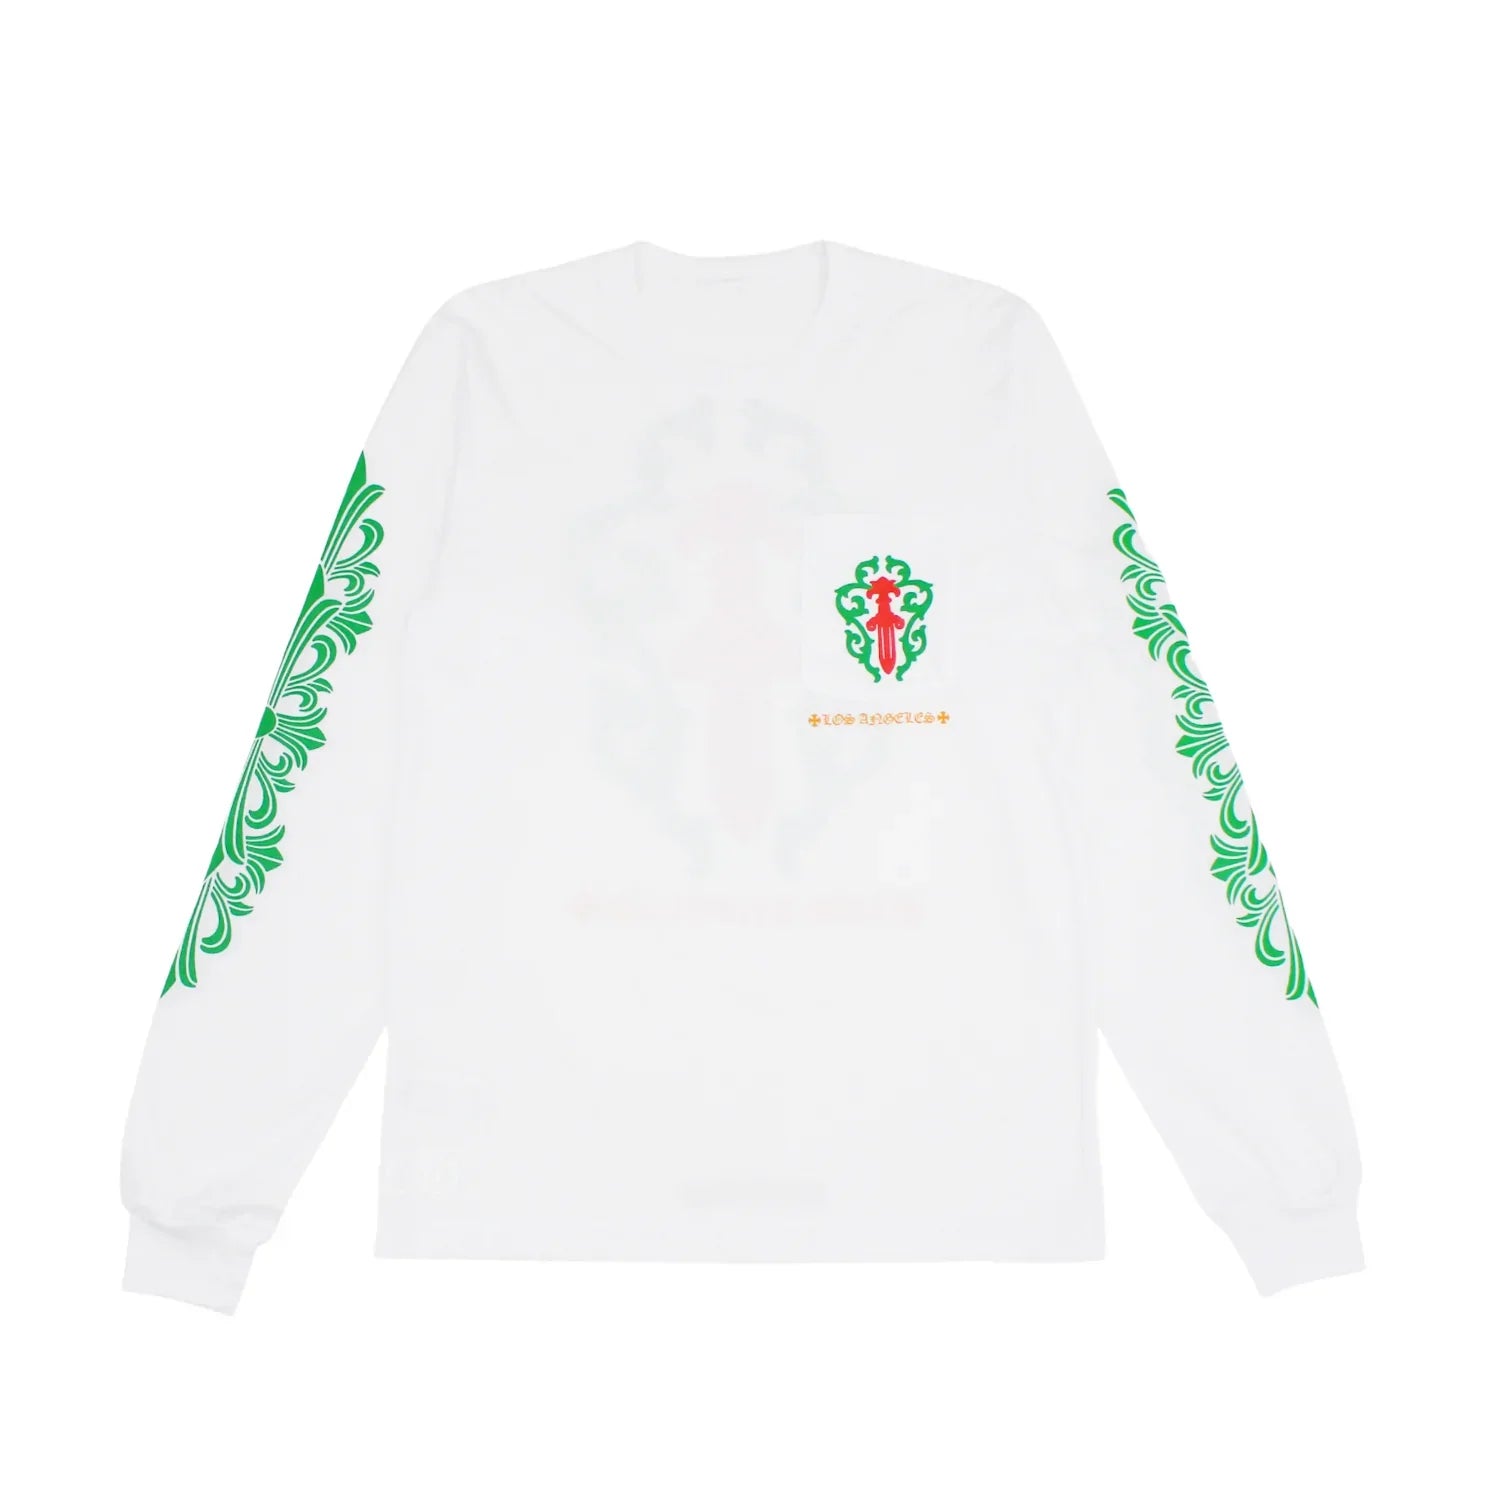 Los Angeles Exclusive Dagger L/S T-Shirt White/Green/Red